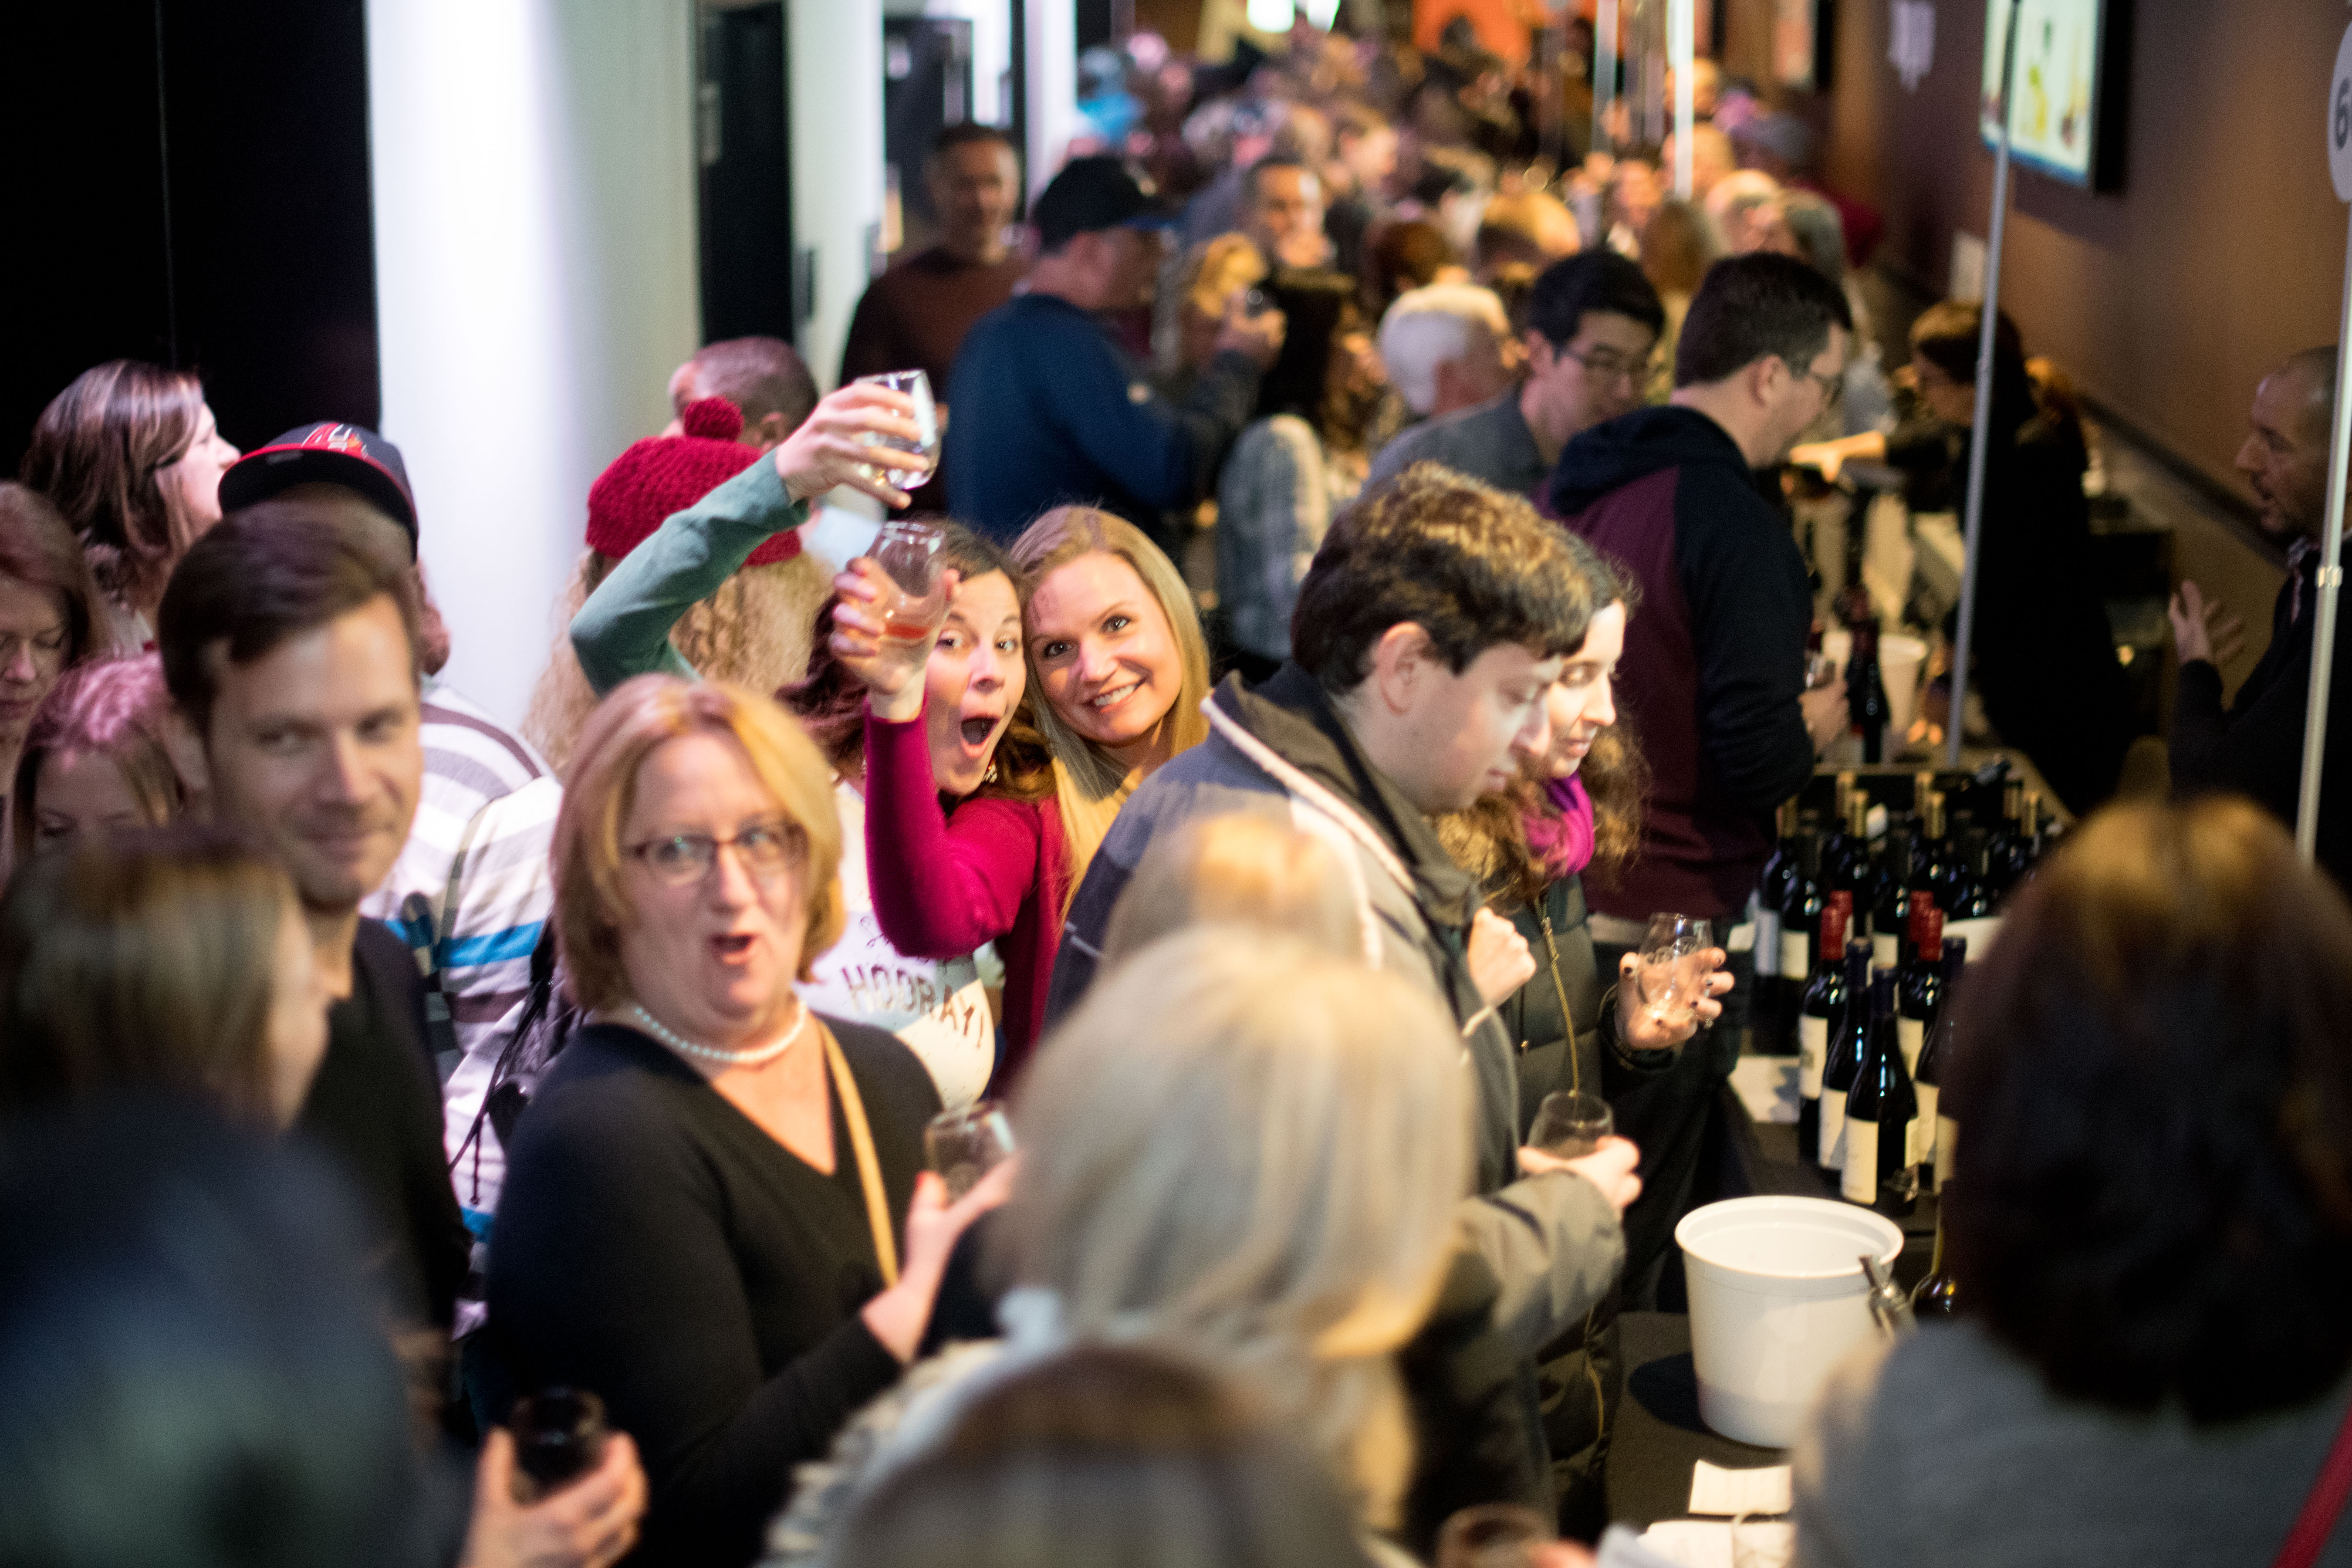 The NYC Winter Wine Festival presented by Citi features a curated selection of wines, artisanal food samplings, light bites on the buffets, live jazz, and more. Info/Tickets: NewYorkWineEvents.com